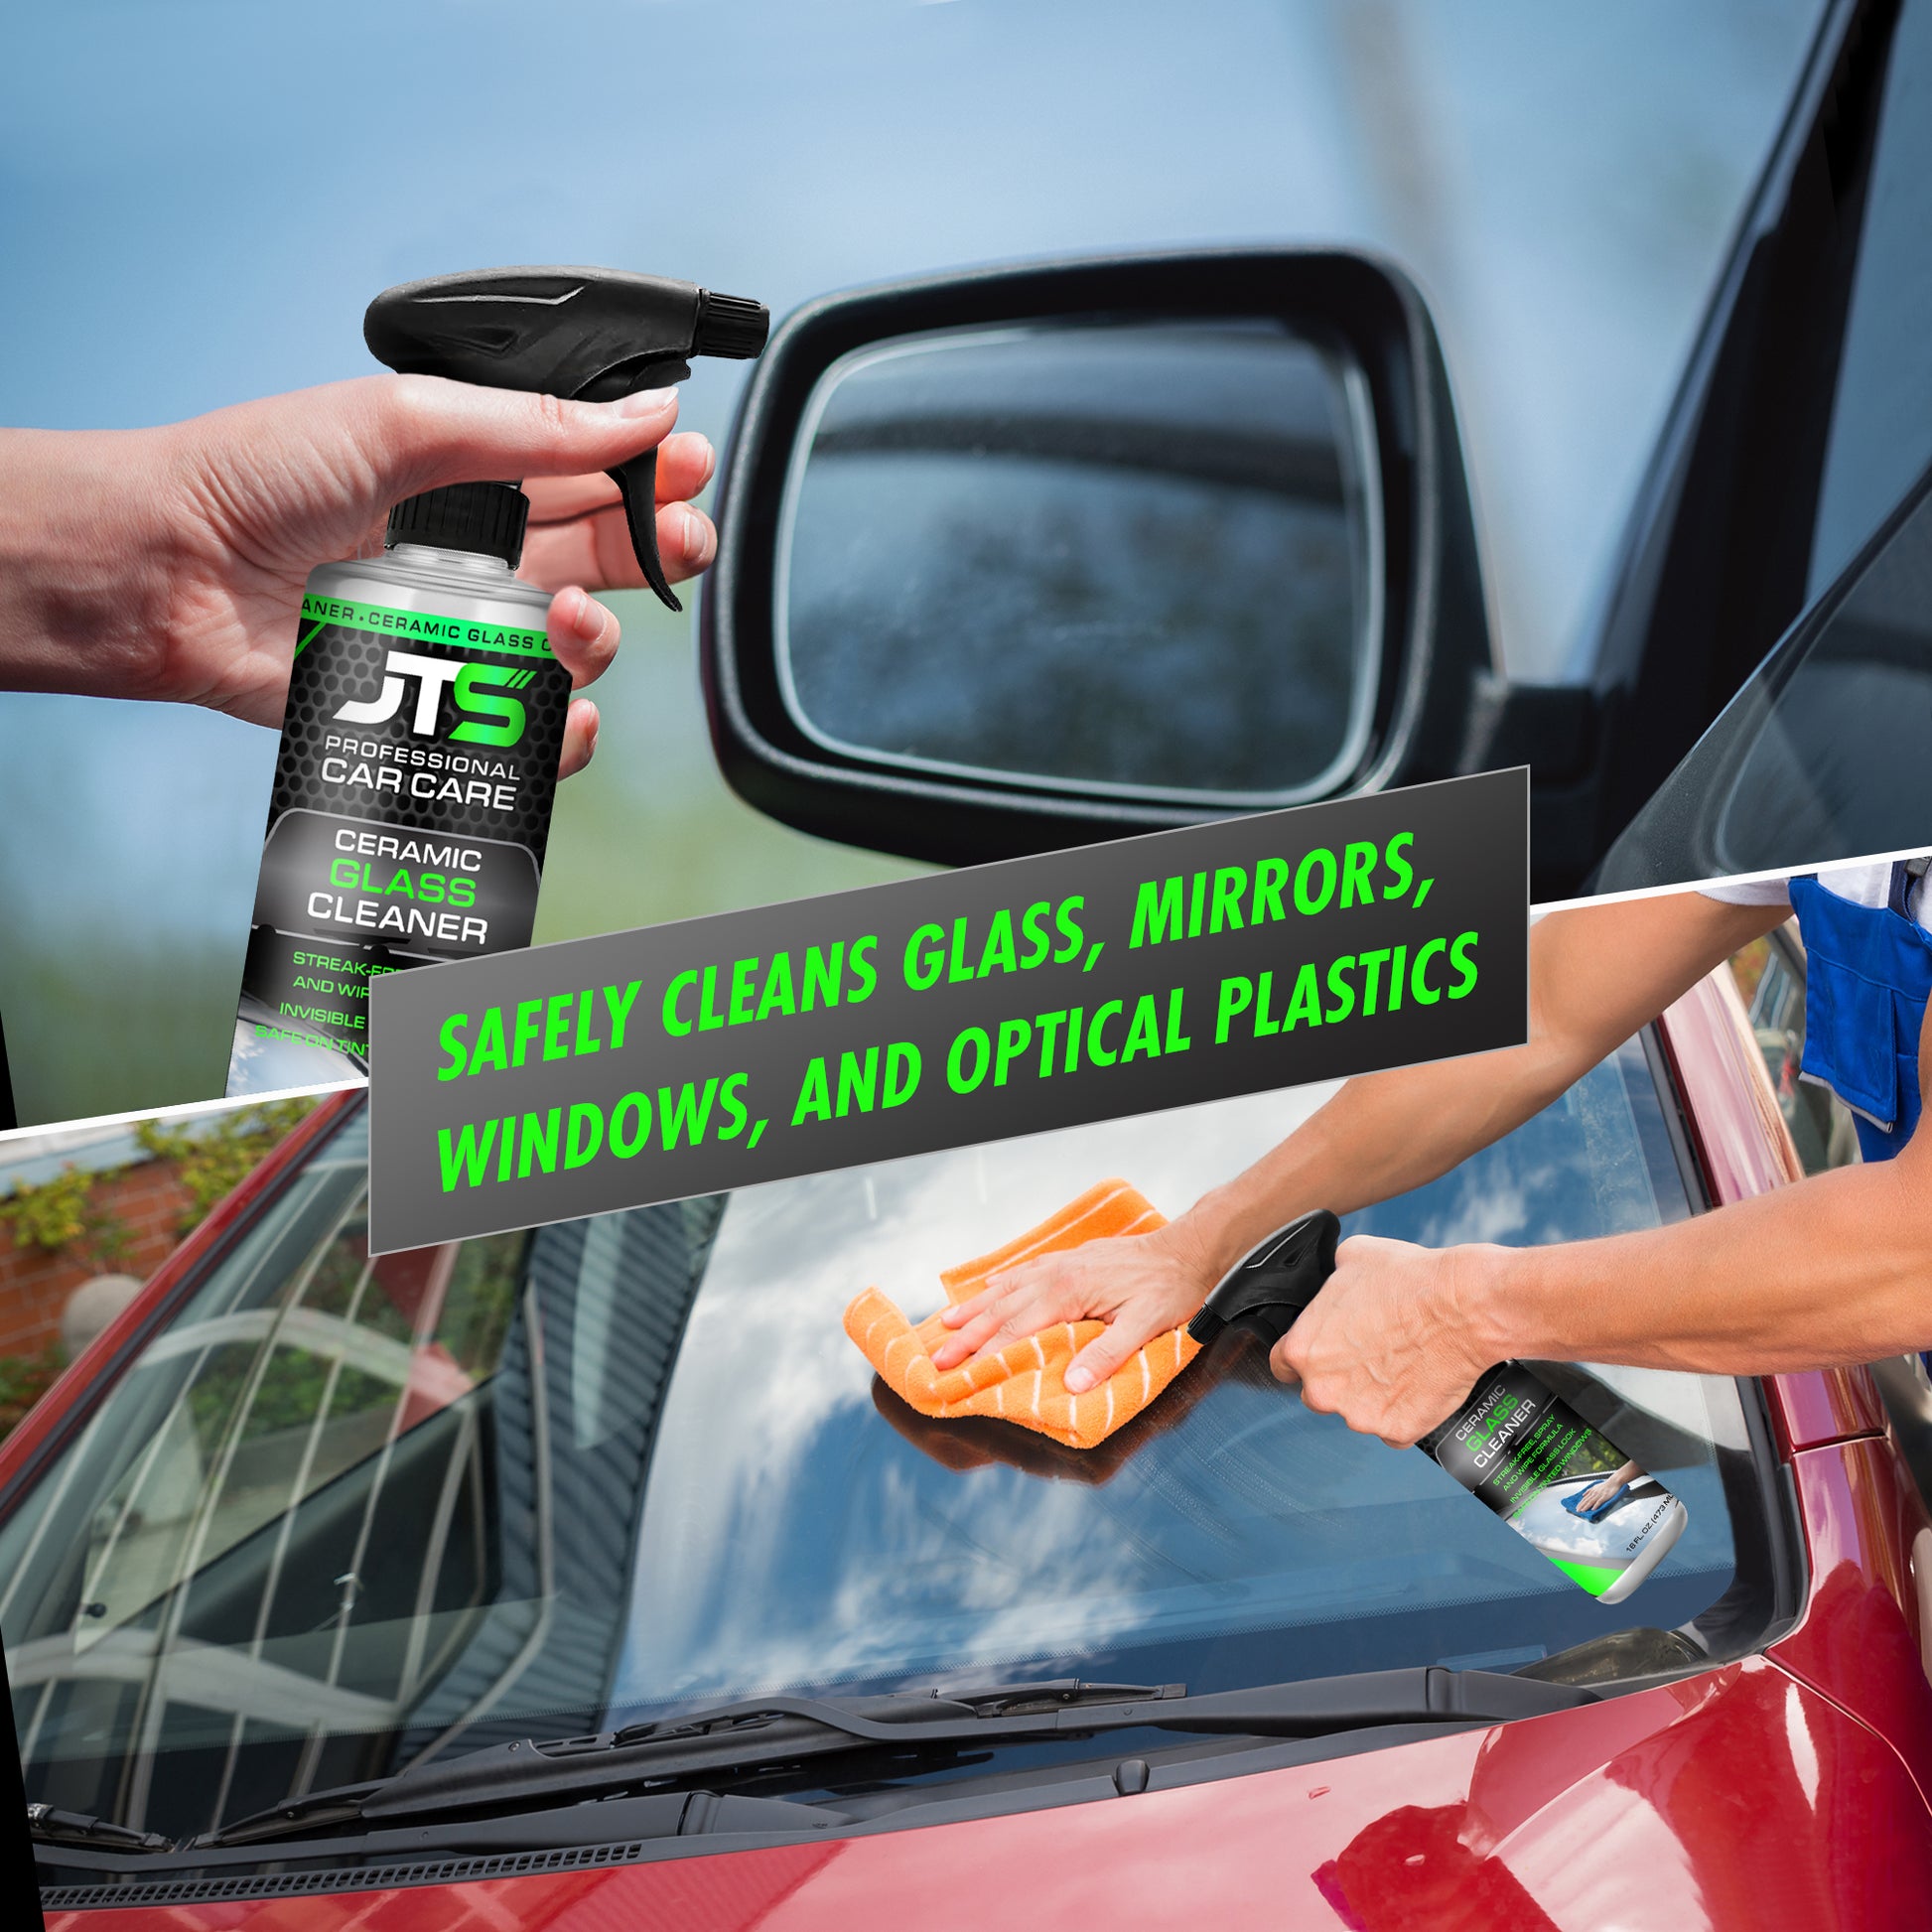 Can you use glass cleaner on car windows?